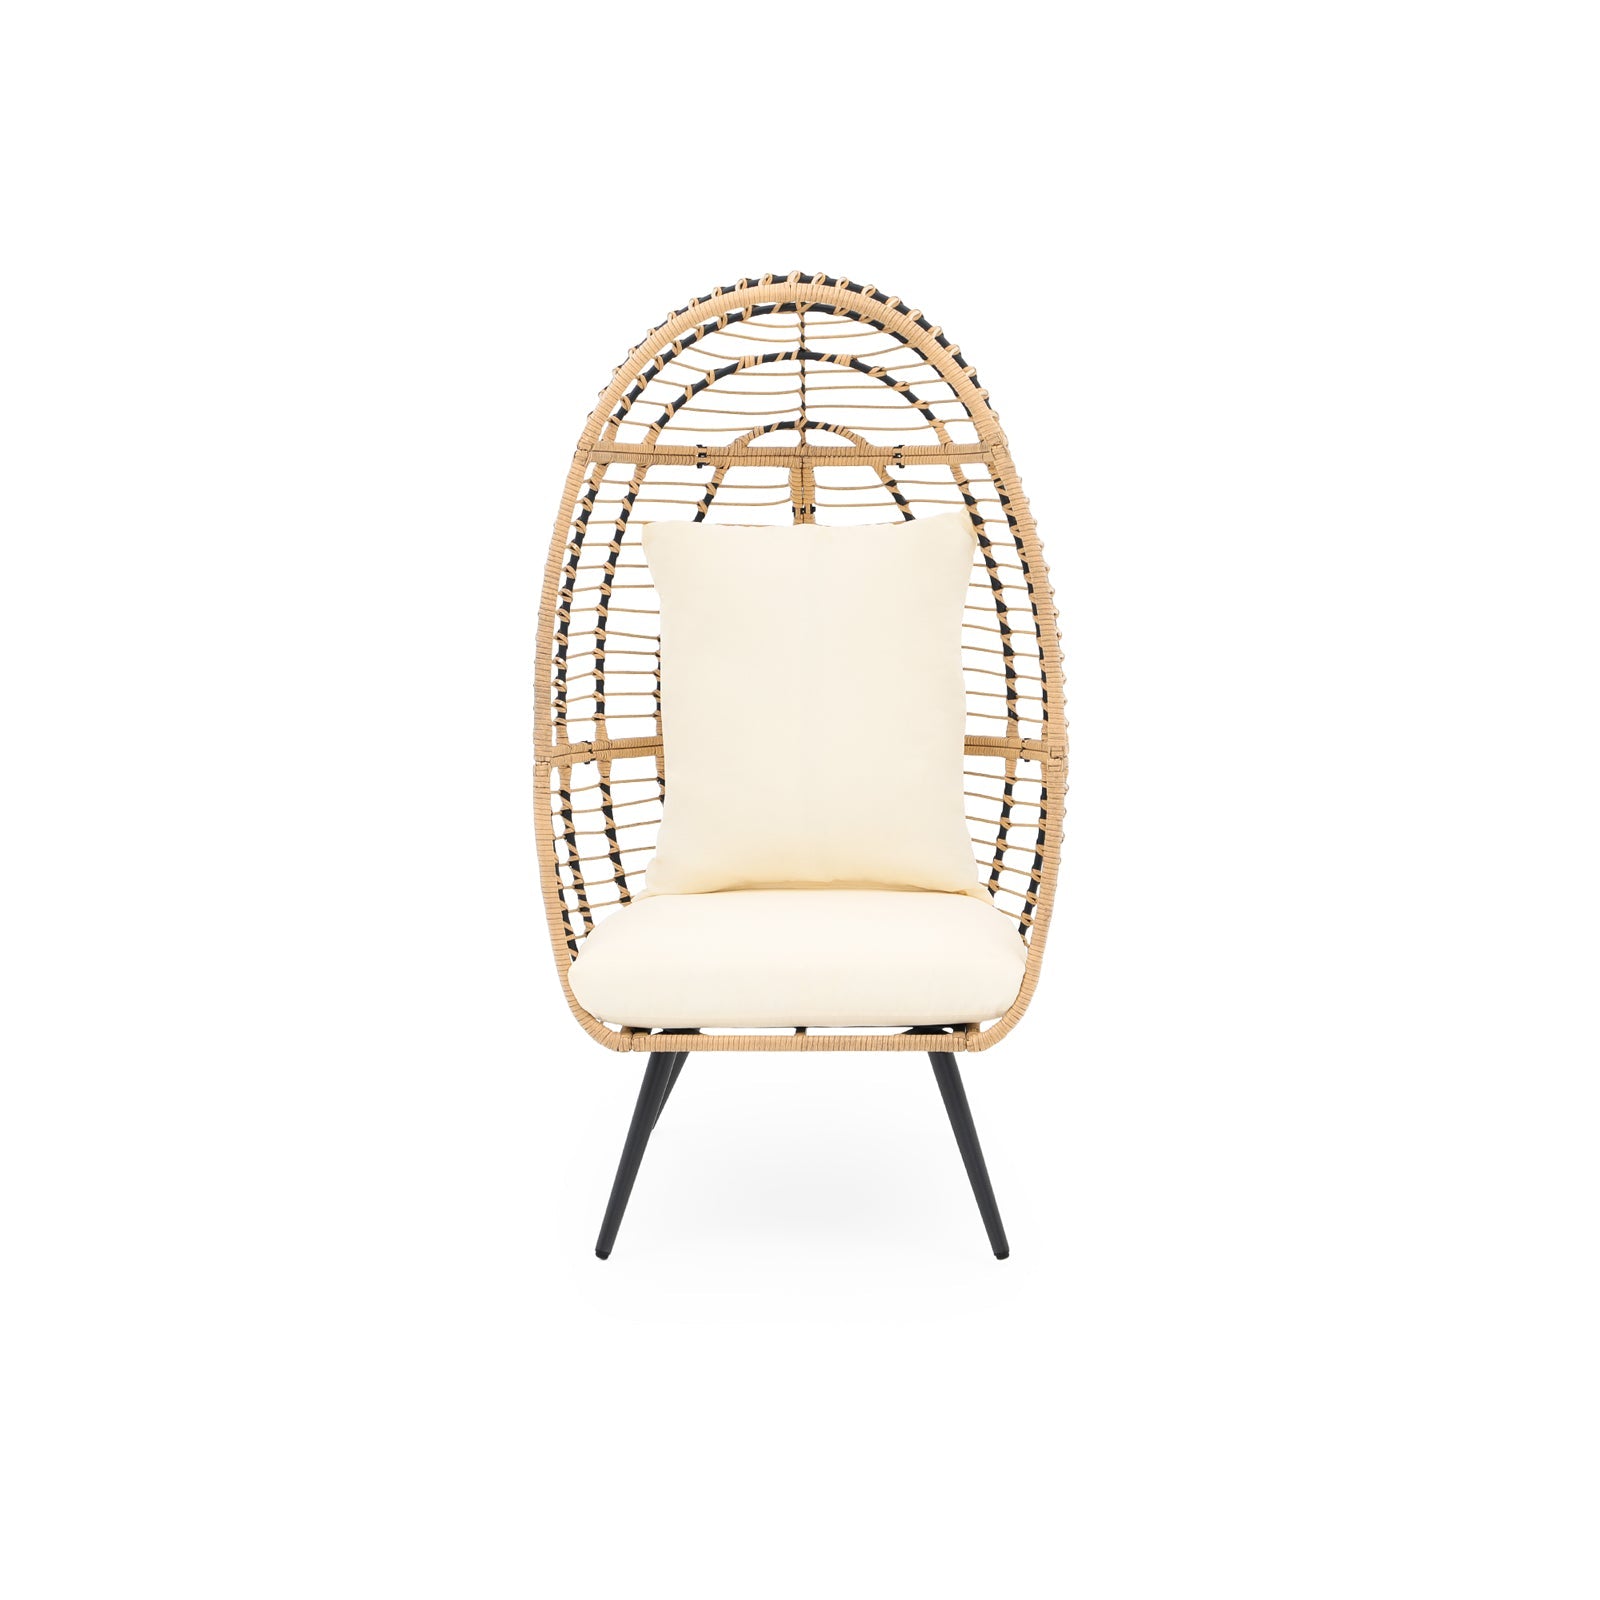 Oia Modern Wicker Outdoor Furniture, Egg Chair with 4 metal legs stands, Natural Rattan Design, white seat and back cushions, front view - Jardina Furniture